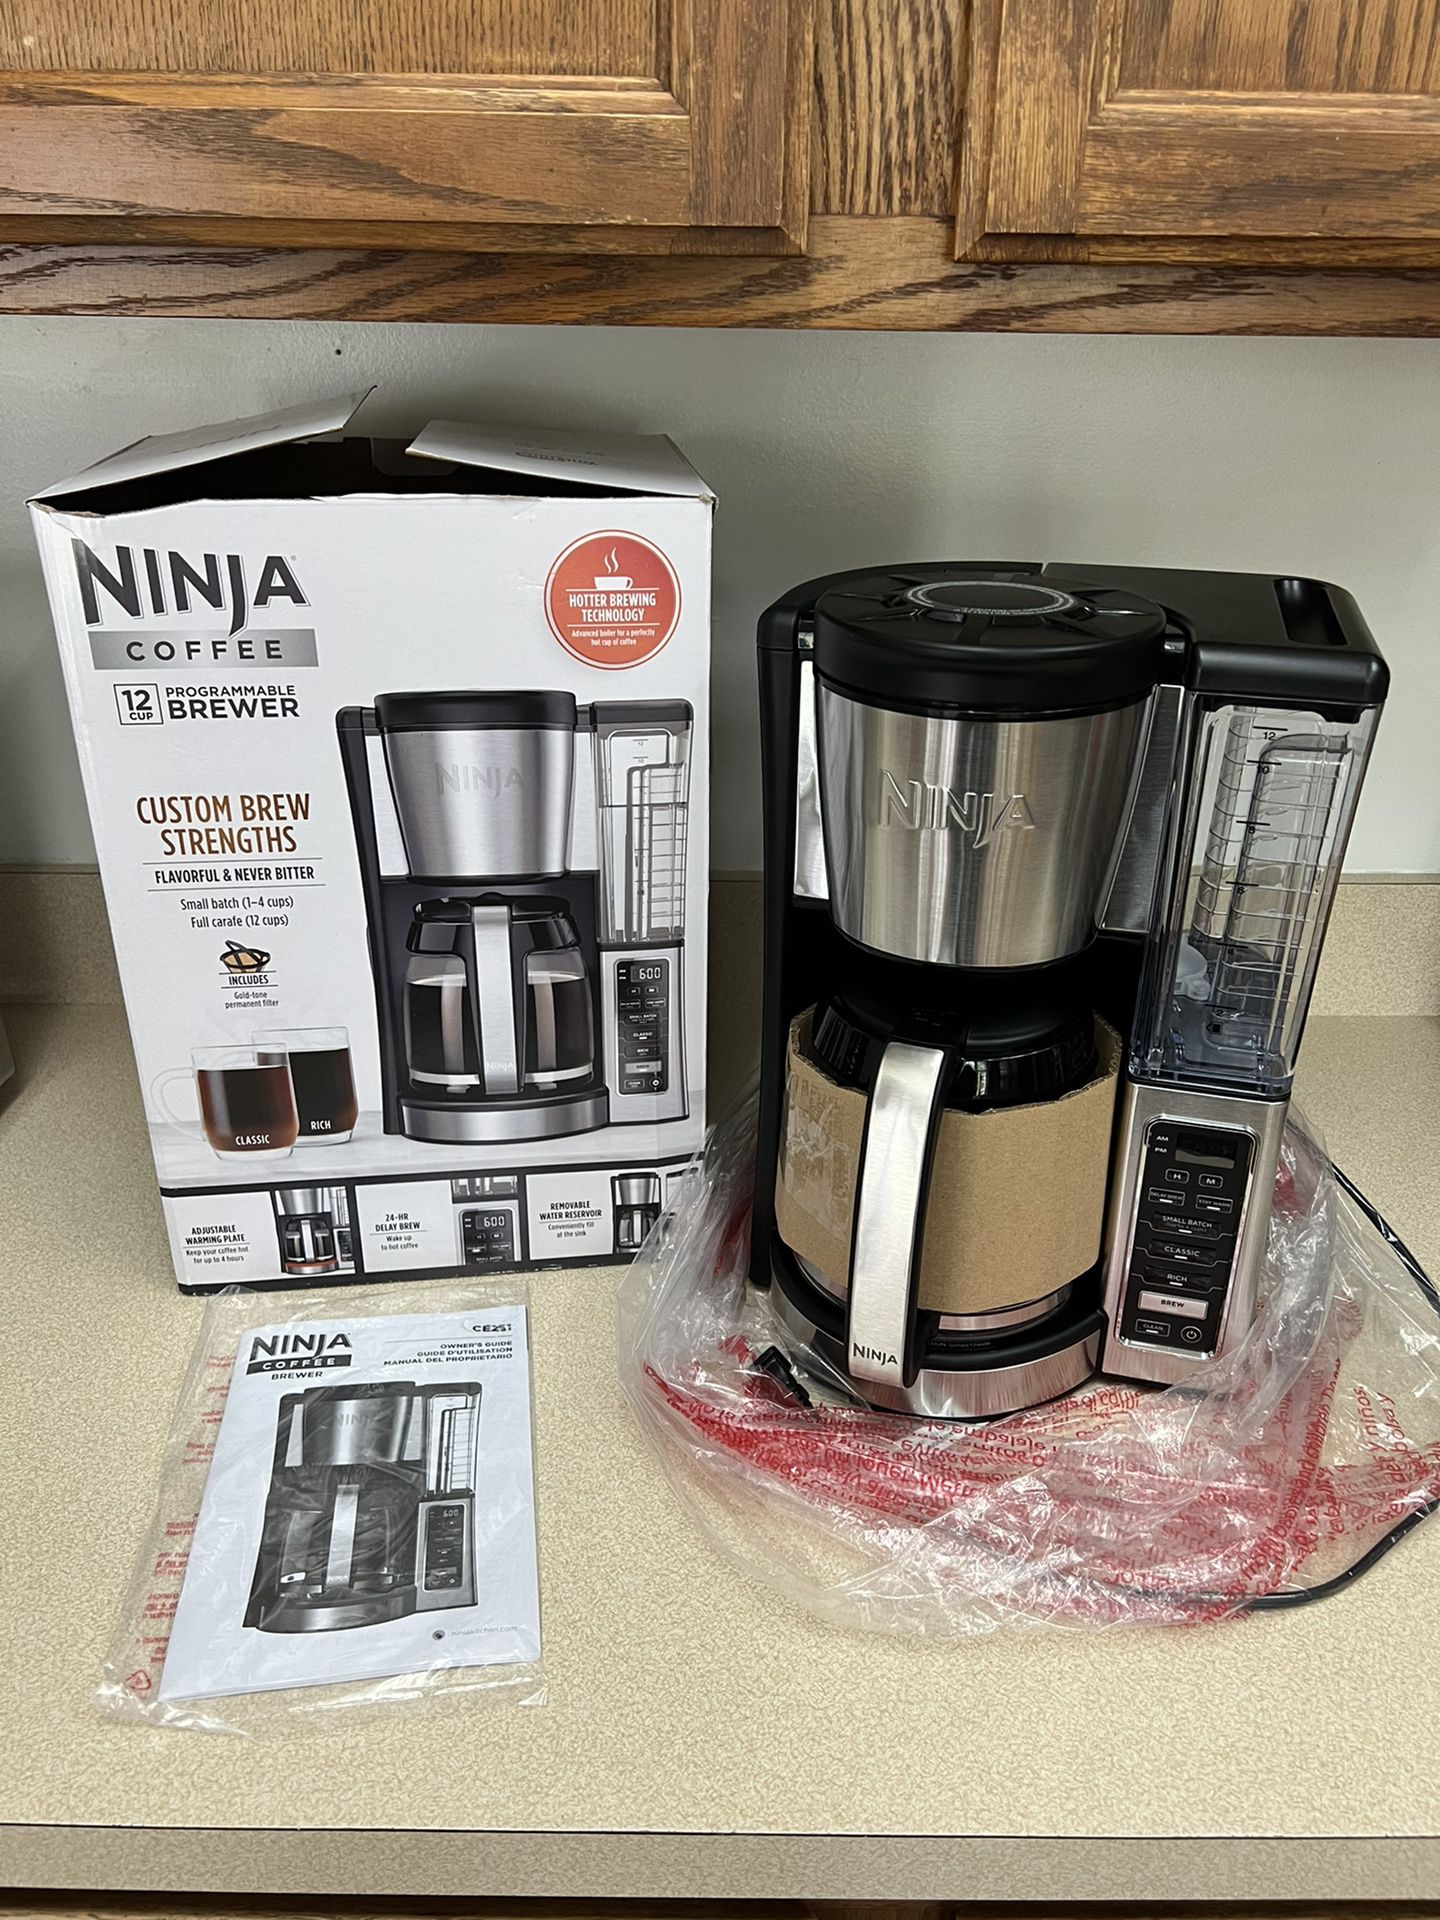 New Open Box -Ninja Coffee maker 12-Cup Programmable Brewer, CE251 Black  and Stainless Steel Finish . for Sale in Oviedo, FL - OfferUp